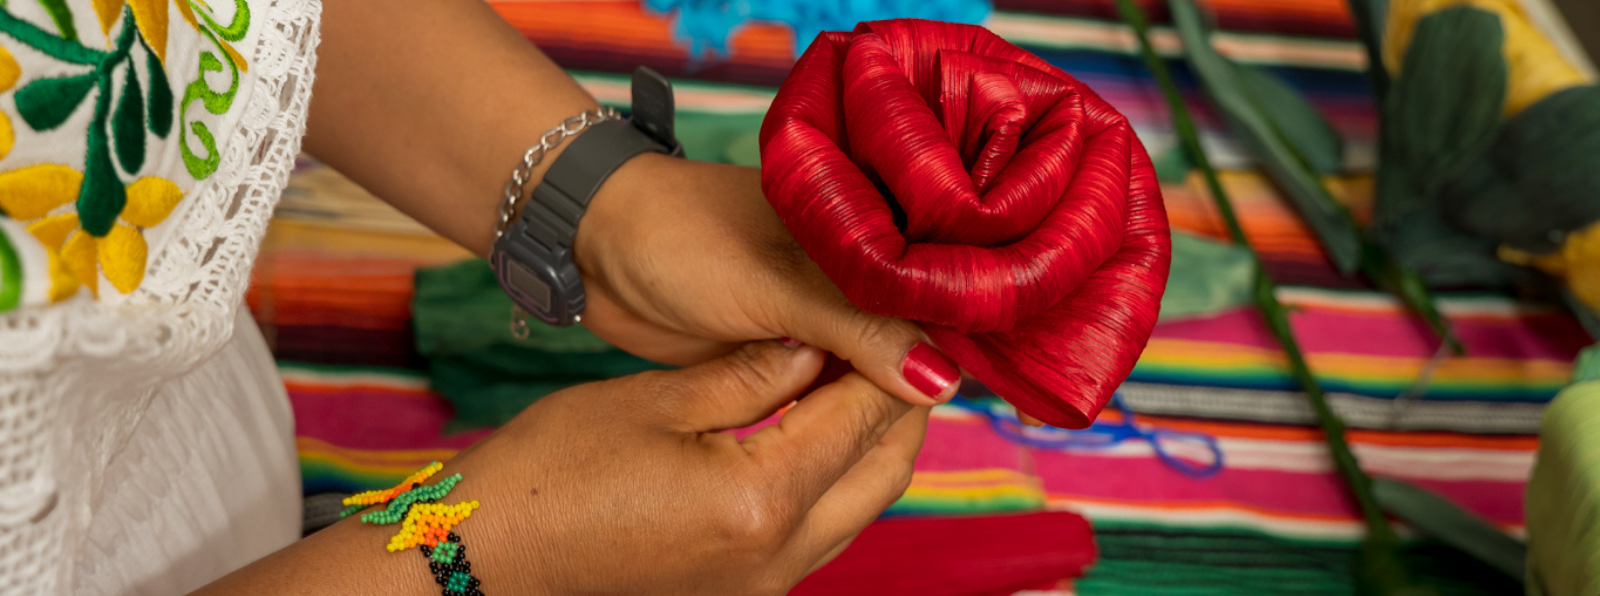 Two hands holding a folded fabric that resembles a flower.